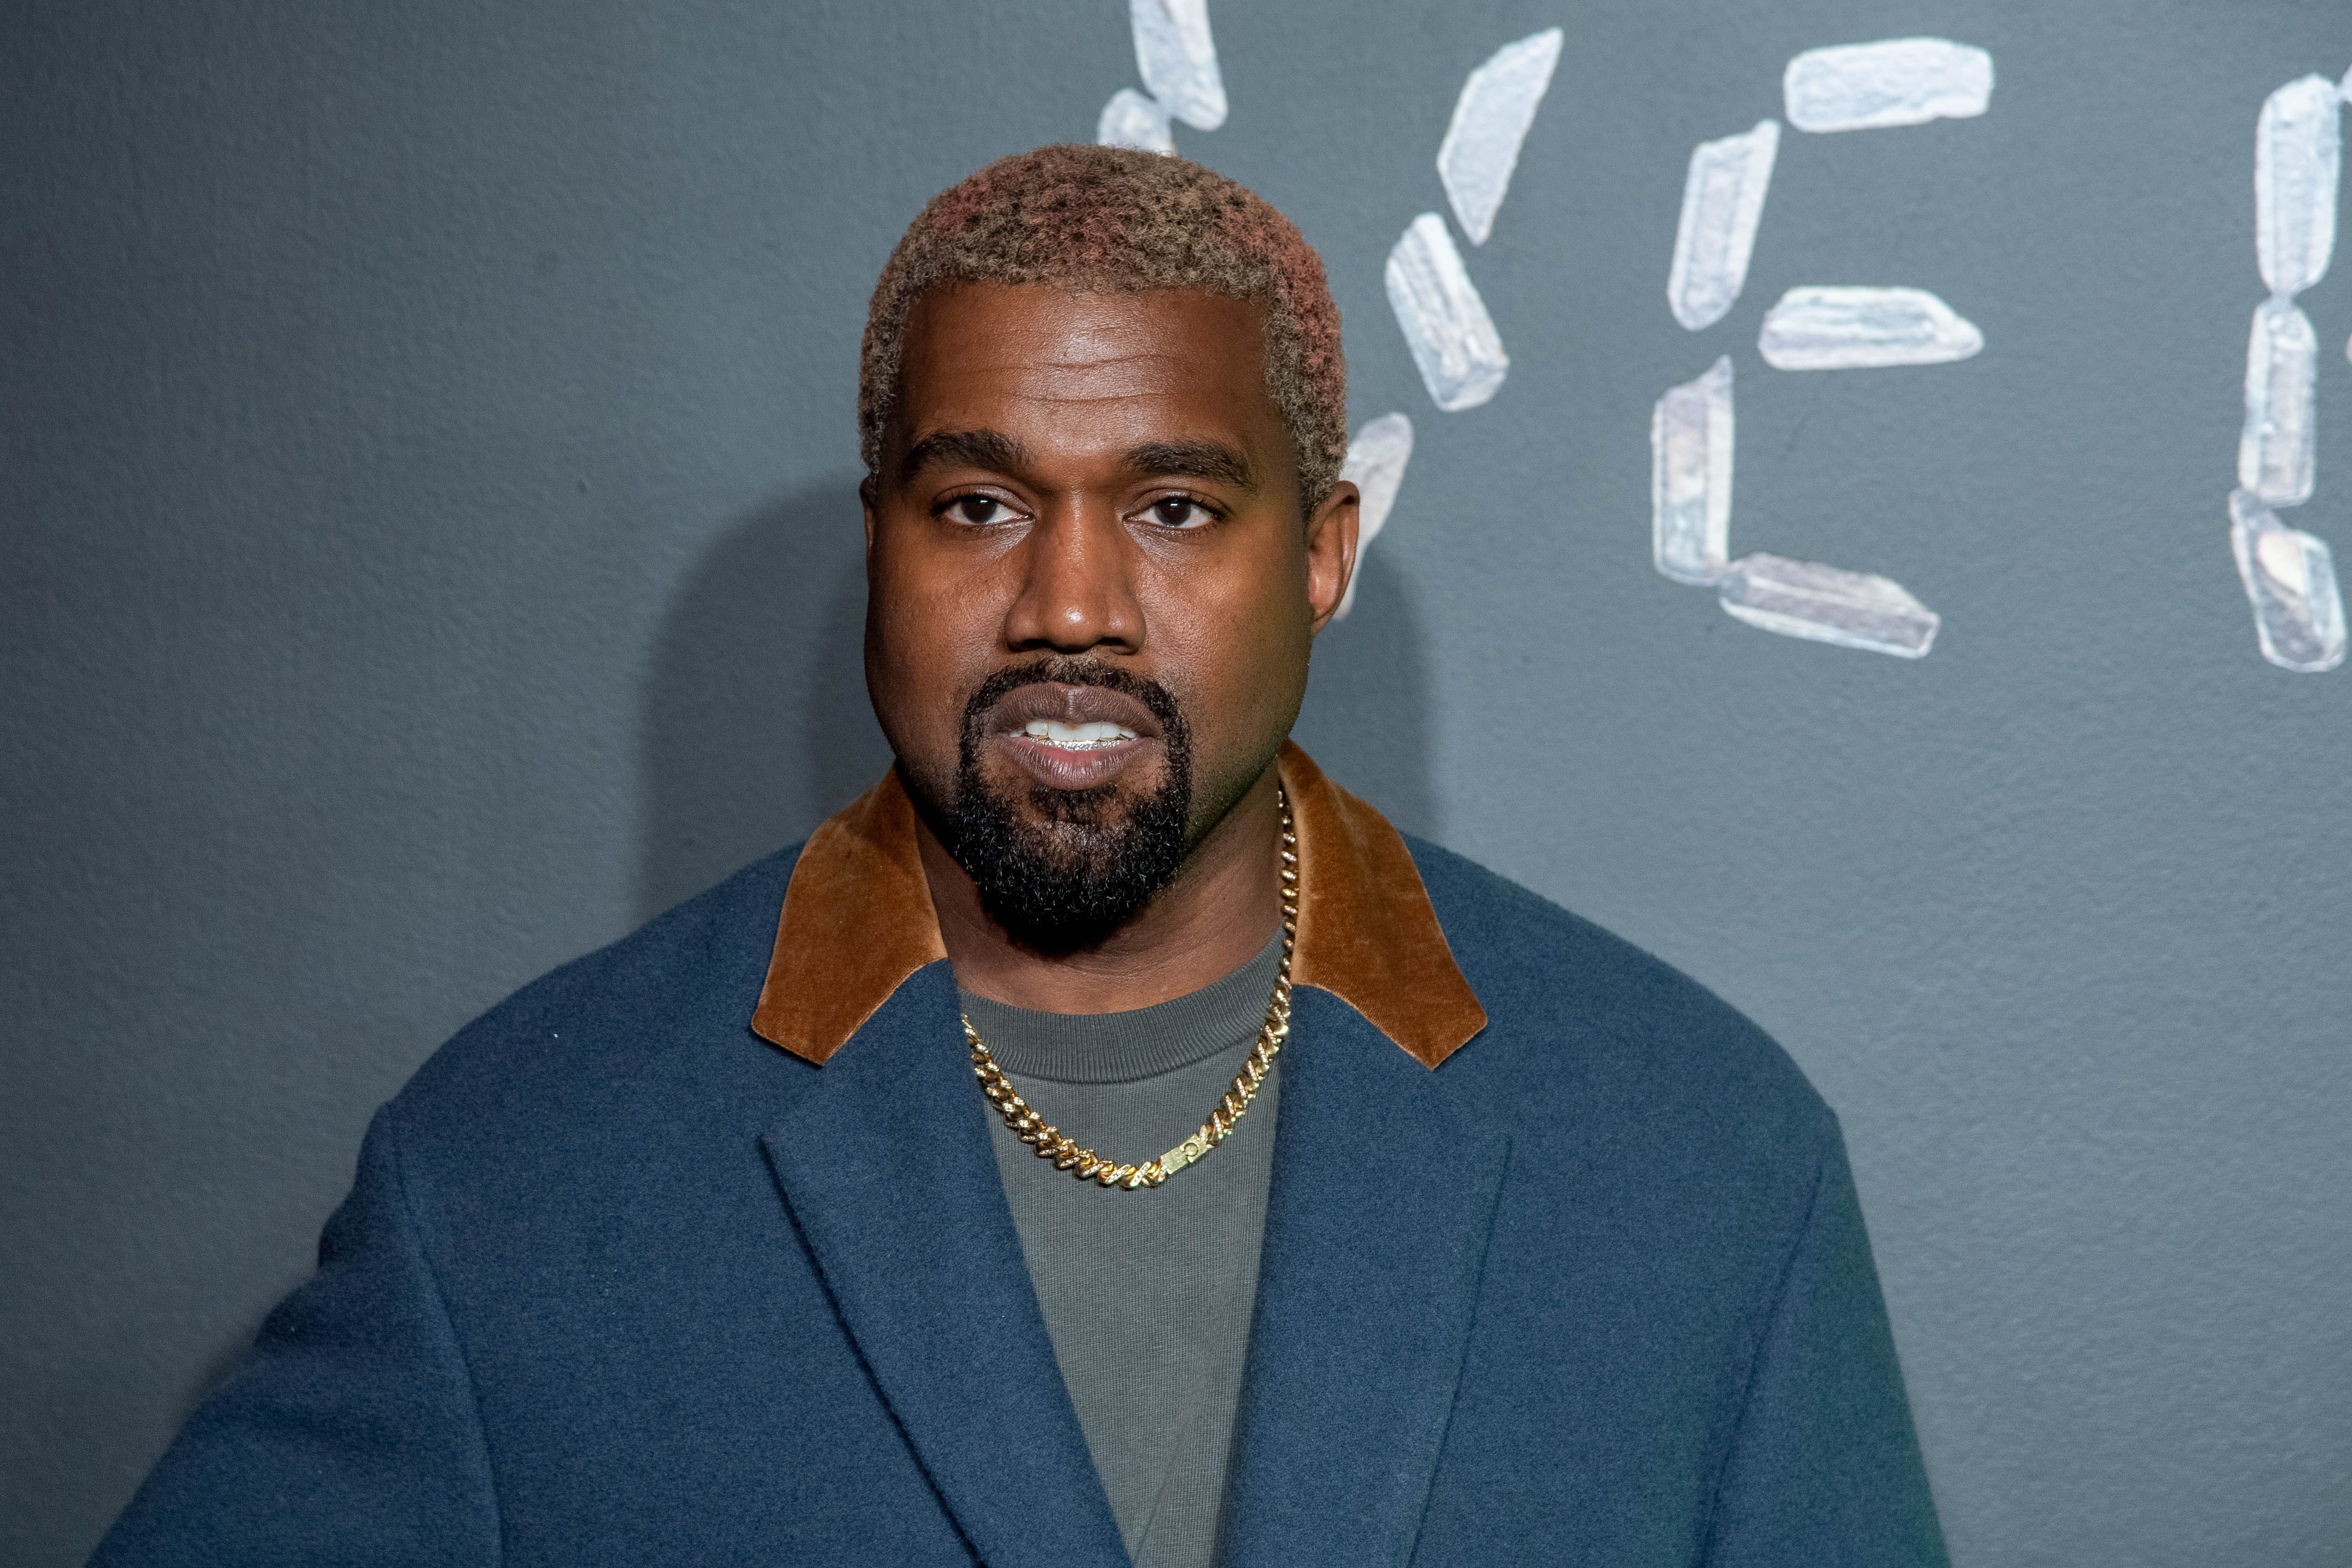 Music Producer and rapper Kanye West attending the Versace fall 2019 fashion show in New York City | Photo: Getty Images